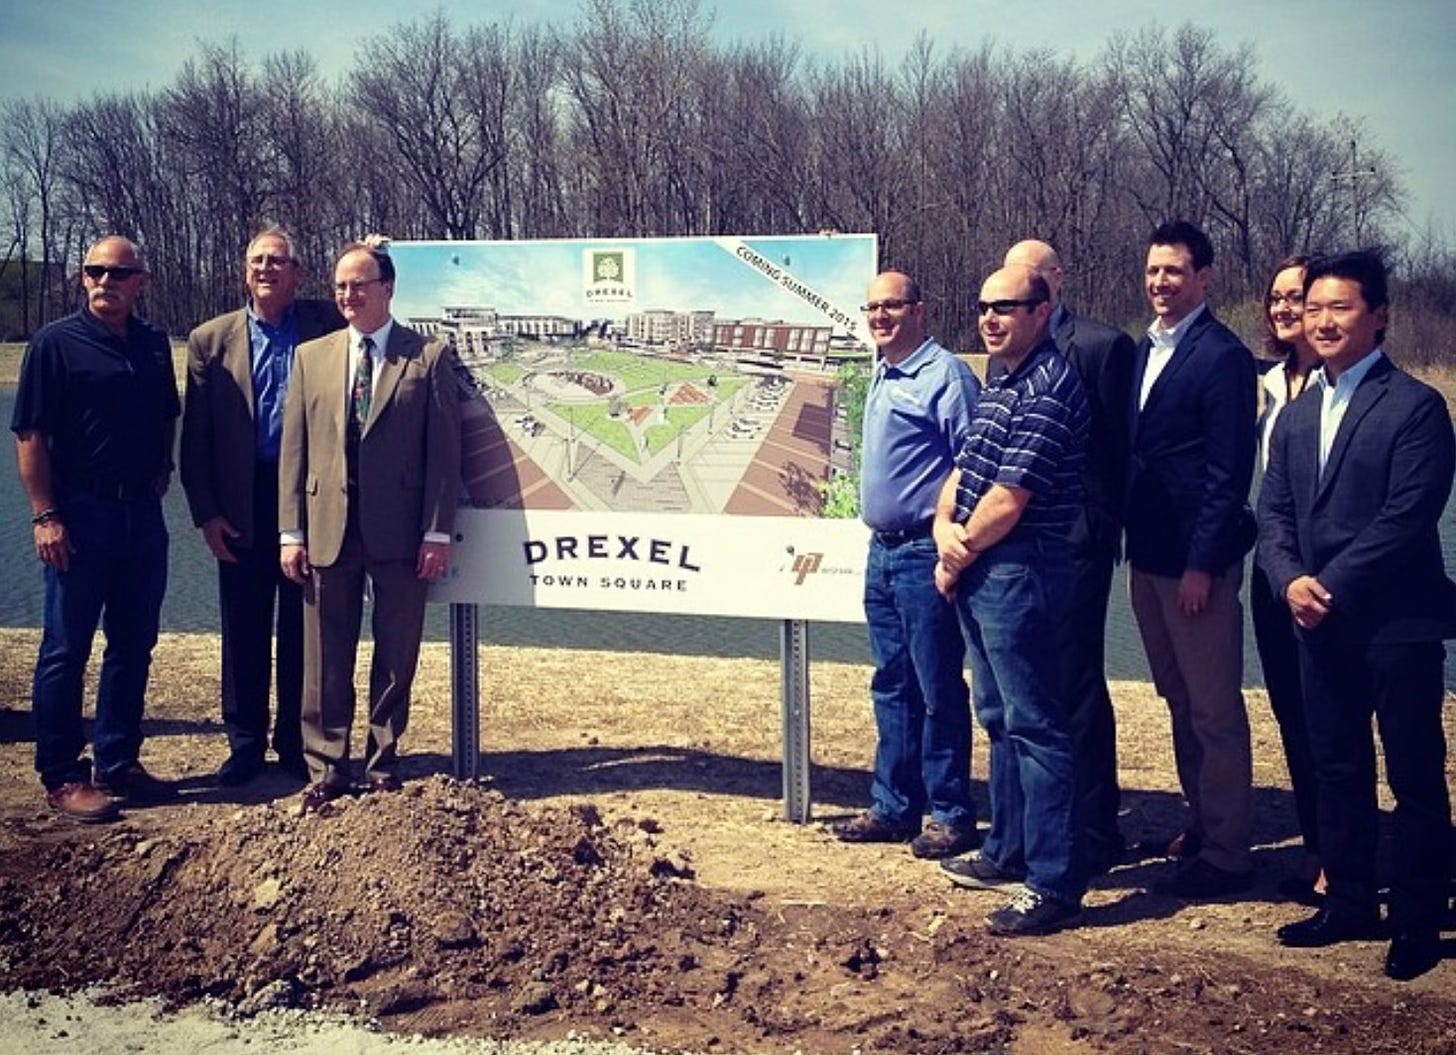 men standing next to sign at Drexel Town Square groundbreaking event